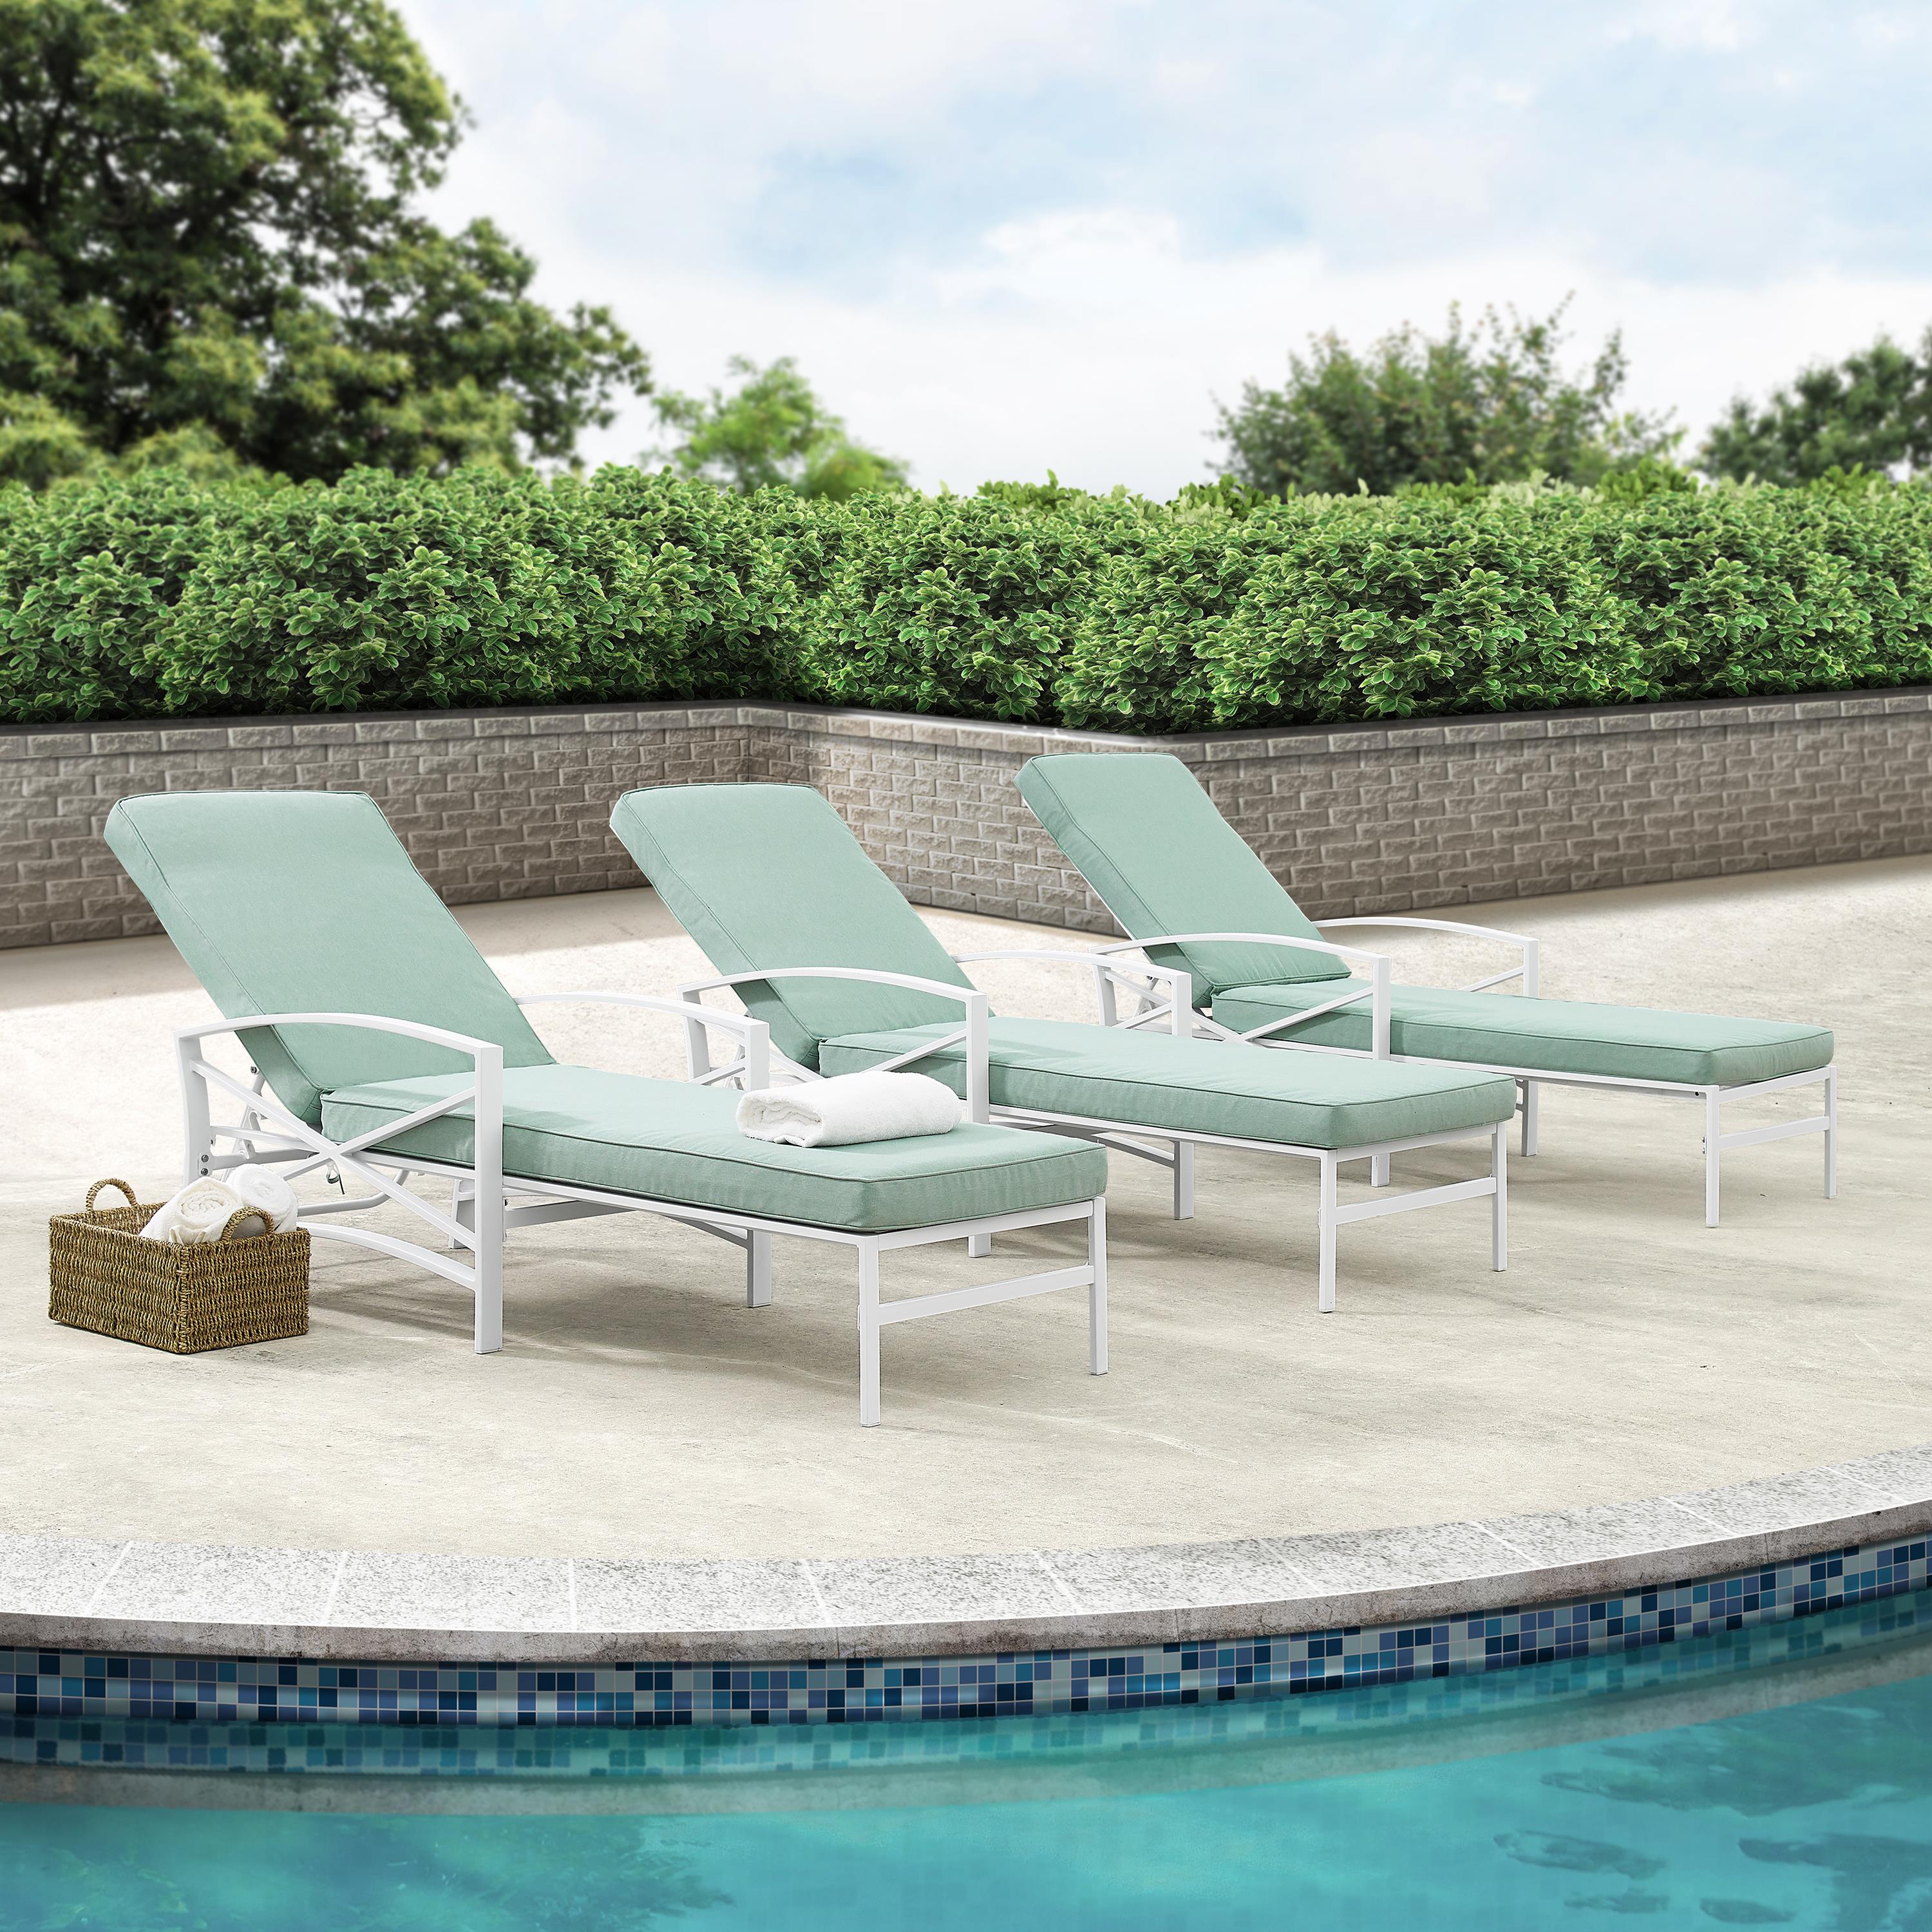 Crosley Kaplan Metal Patio Chaise Lounge in Mist and White - image 3 of 10